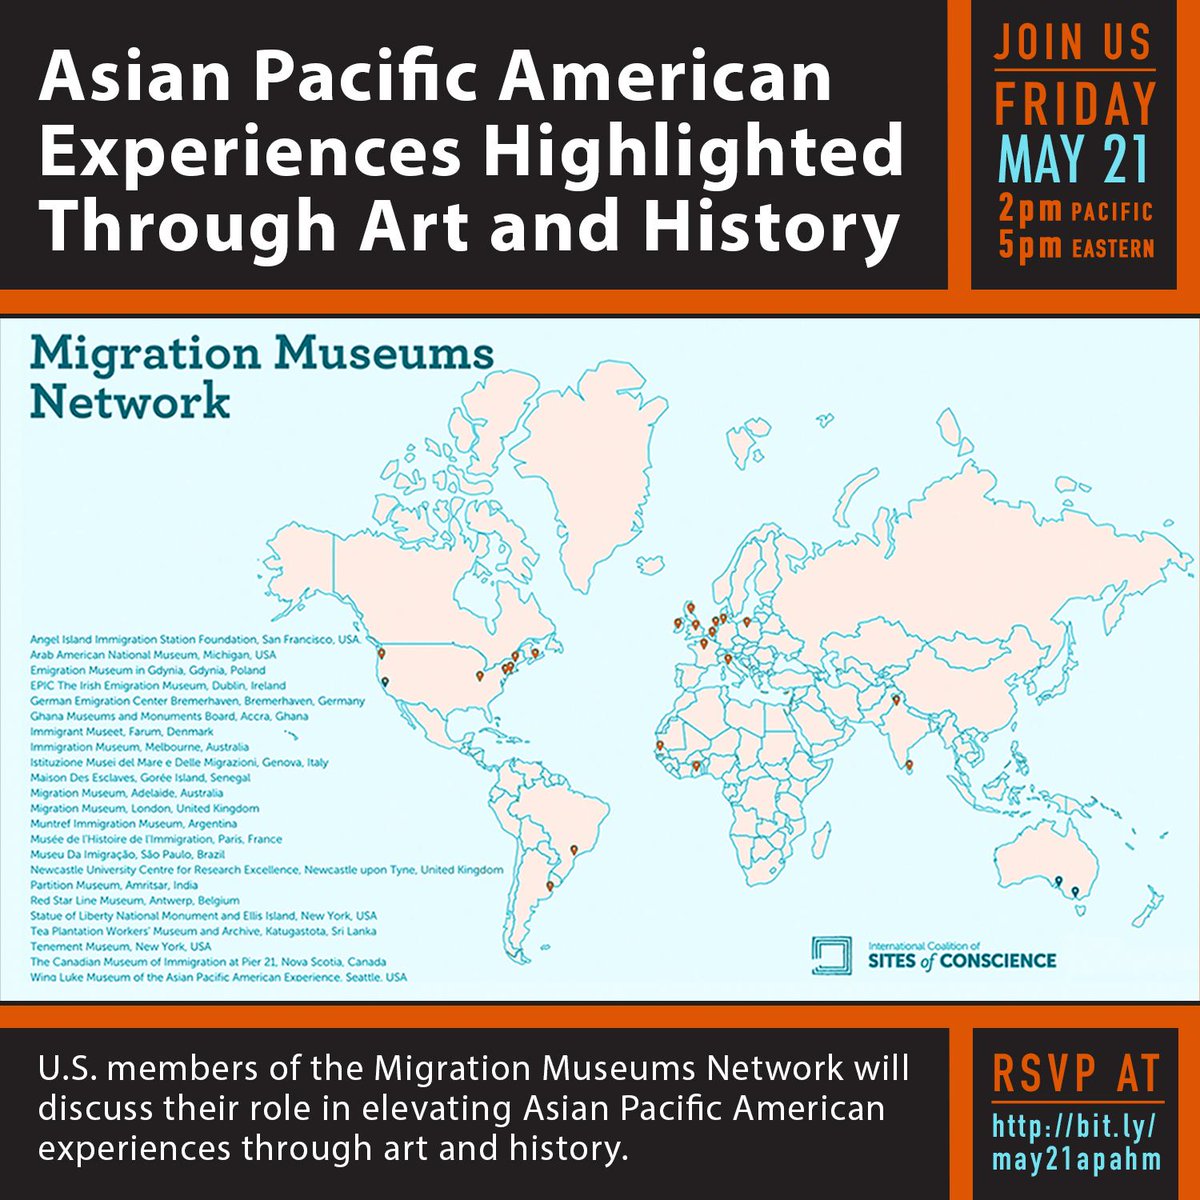 Today at 2pm Pacific, we will be speaking with several US members of the Migration Museums Network to celebrate #AAPIheritage. We hope you are able to join us! 

You can register for the program through the following link: ow.ly/XNBE50EPPOf